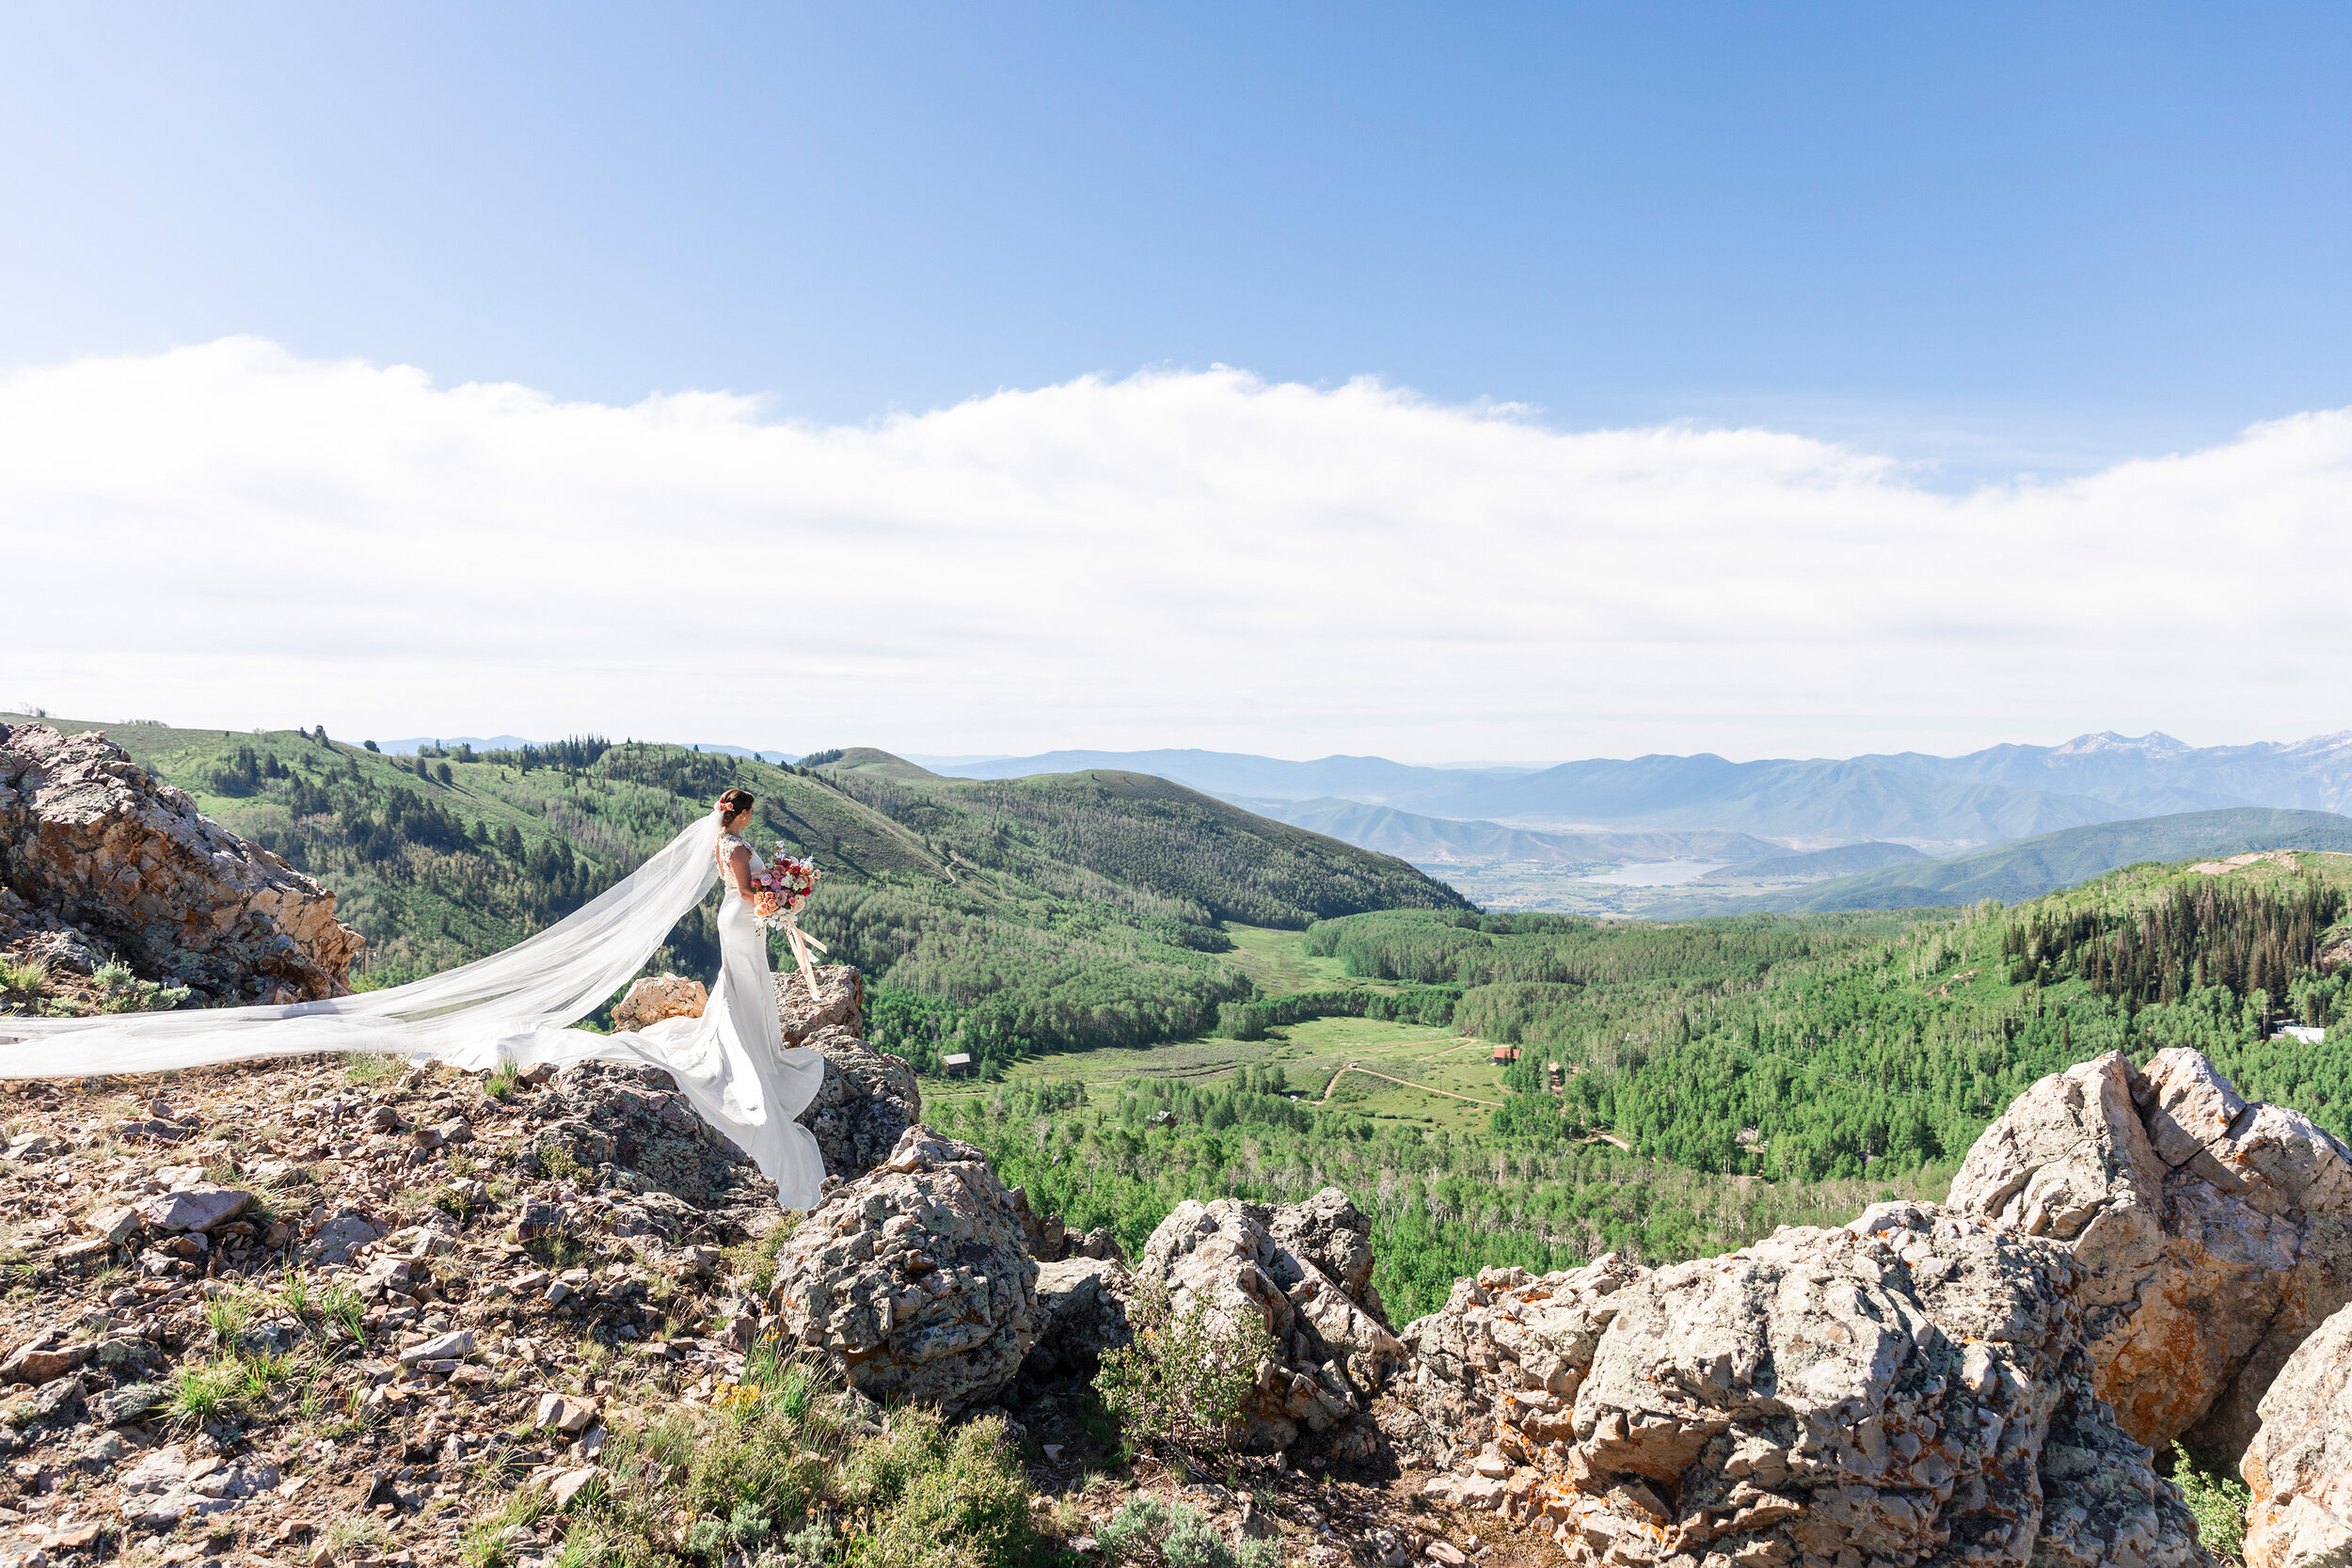  majestic summer wedding bridals shot by clarity lane photography in the utah mountains featuring a long bridal train. long draped bridal train mountain peak utah valley wedding photographer bridals pastel rose bridal bouquet green utah mountains loo